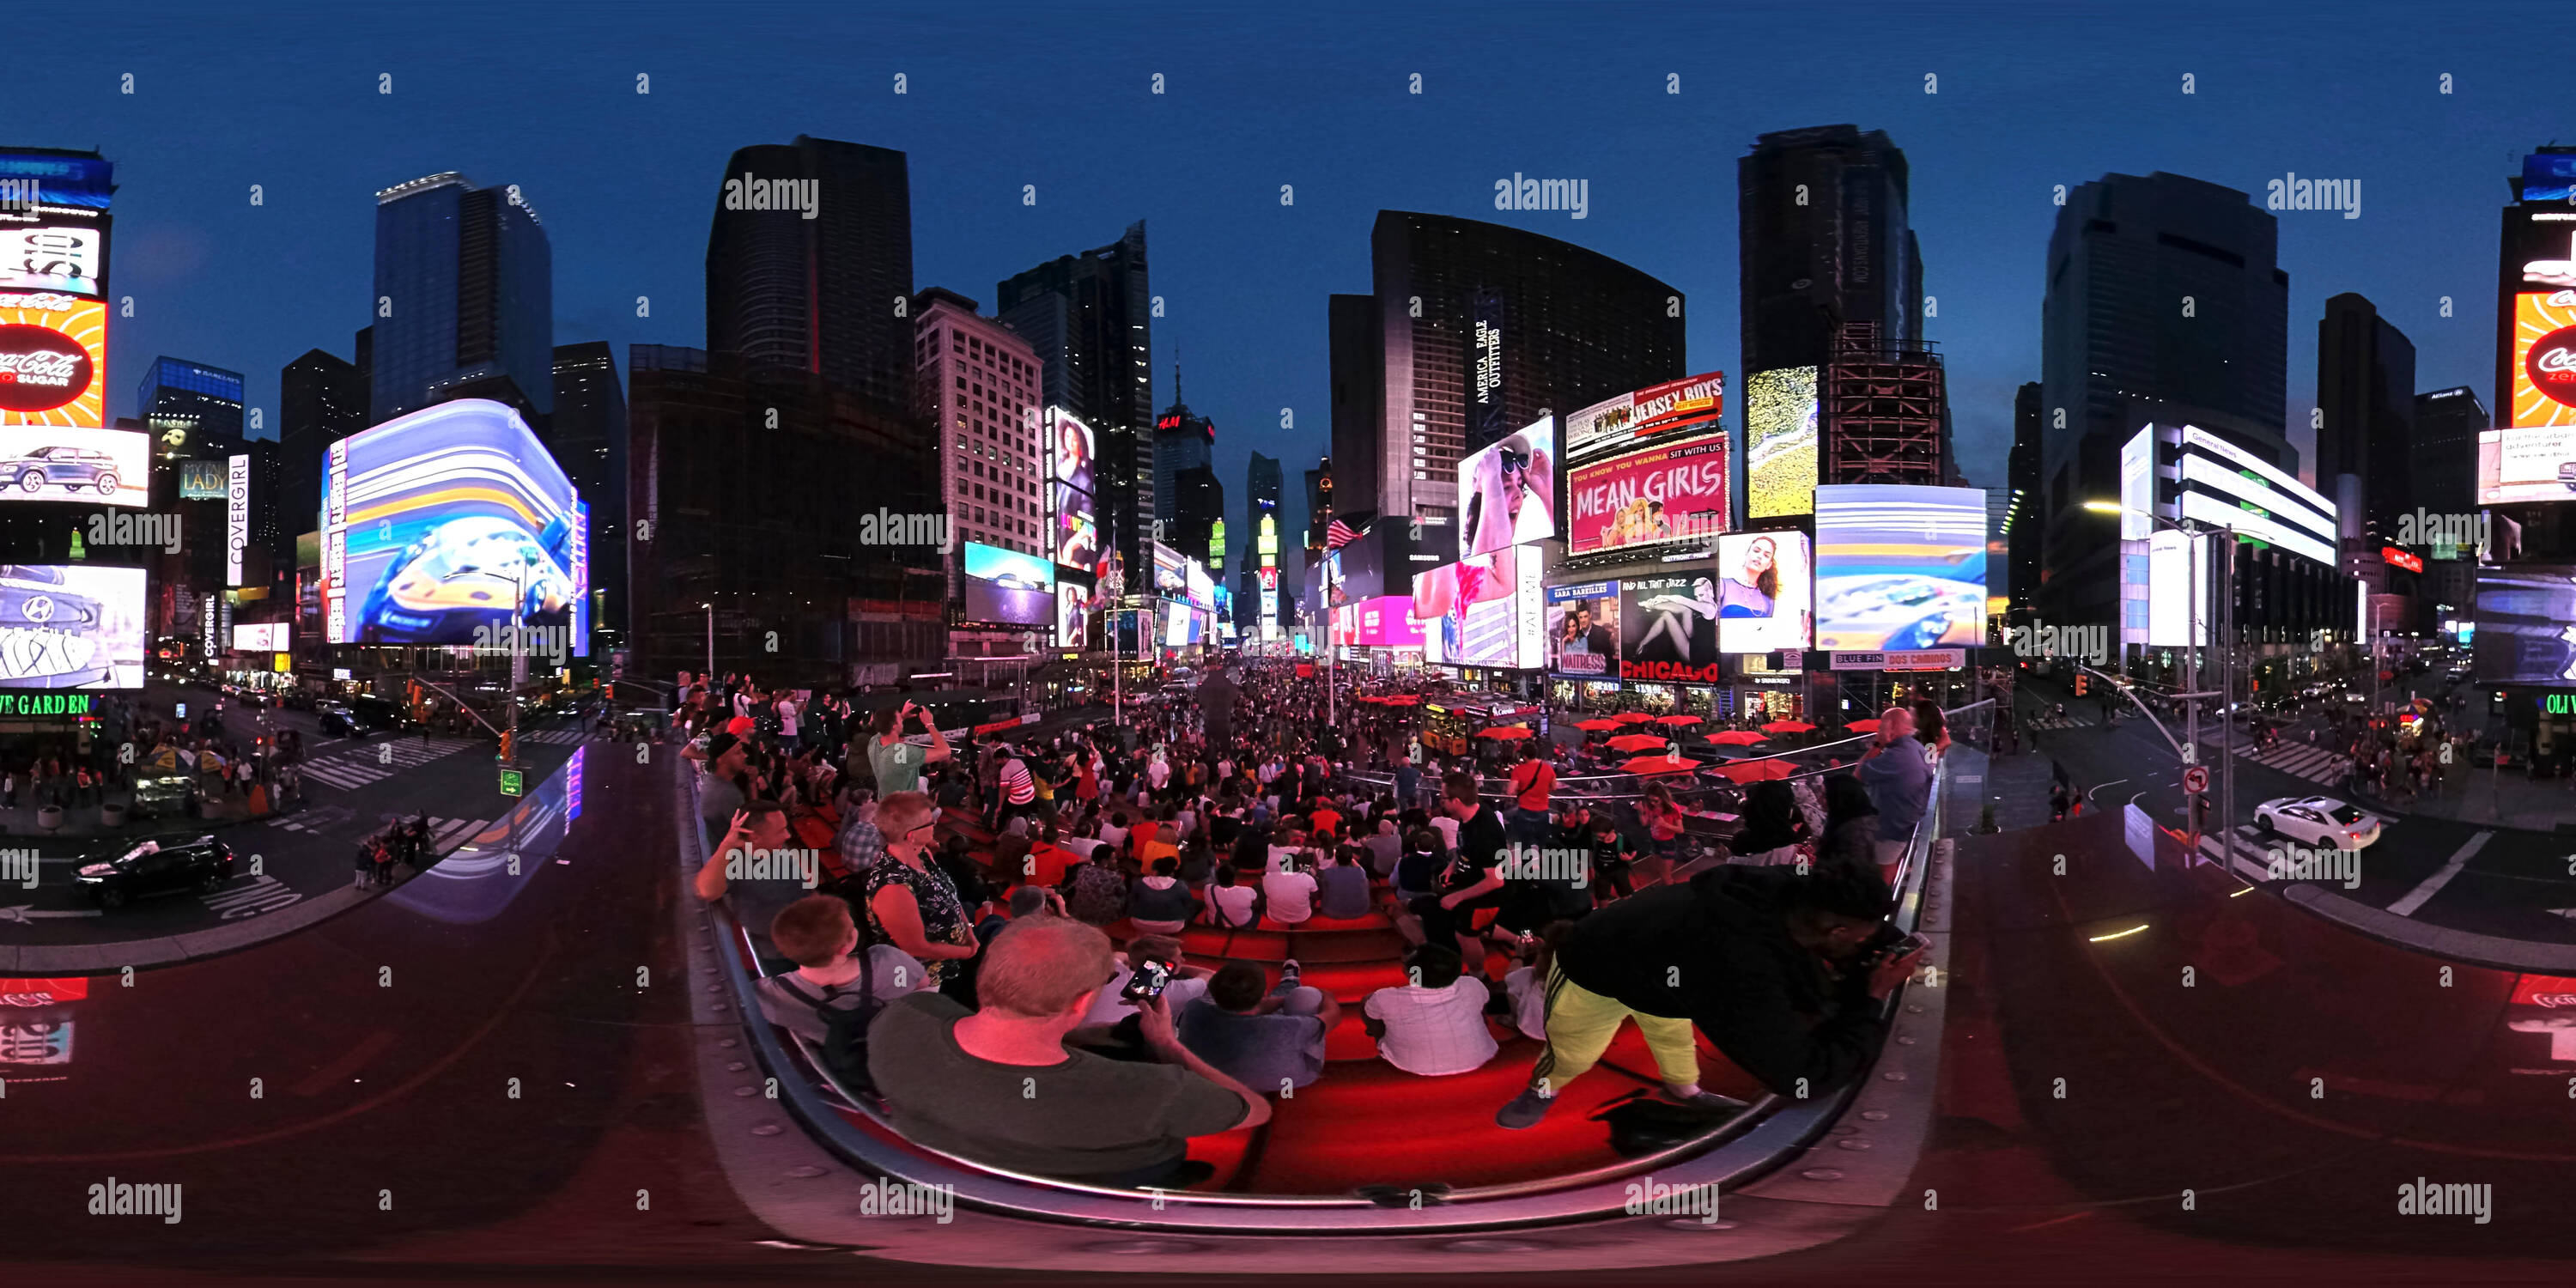 360 degree panoramic view of 360 degrees panorama of Times Square New York at dusk with illuminated advertising boards and tourists taking photos.